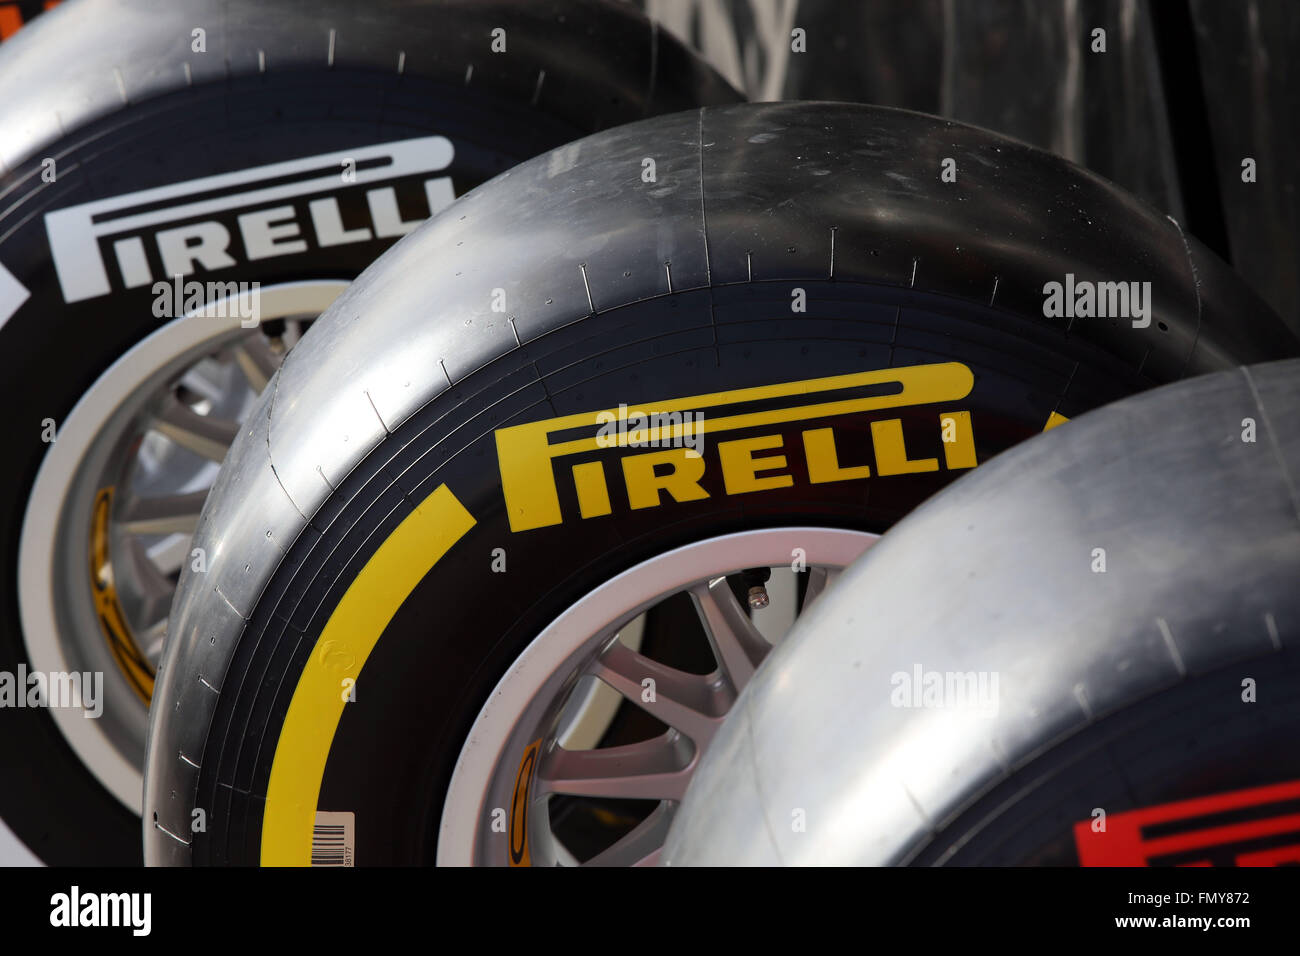 Racing tires from Pirelli seen during the training session for the upcoming Formula One season at the Circuit de Barcelona - Catalunya in Barcelona, Spain, 23 February 2016. Photo: Jens Buettner/dpa Stock Photo